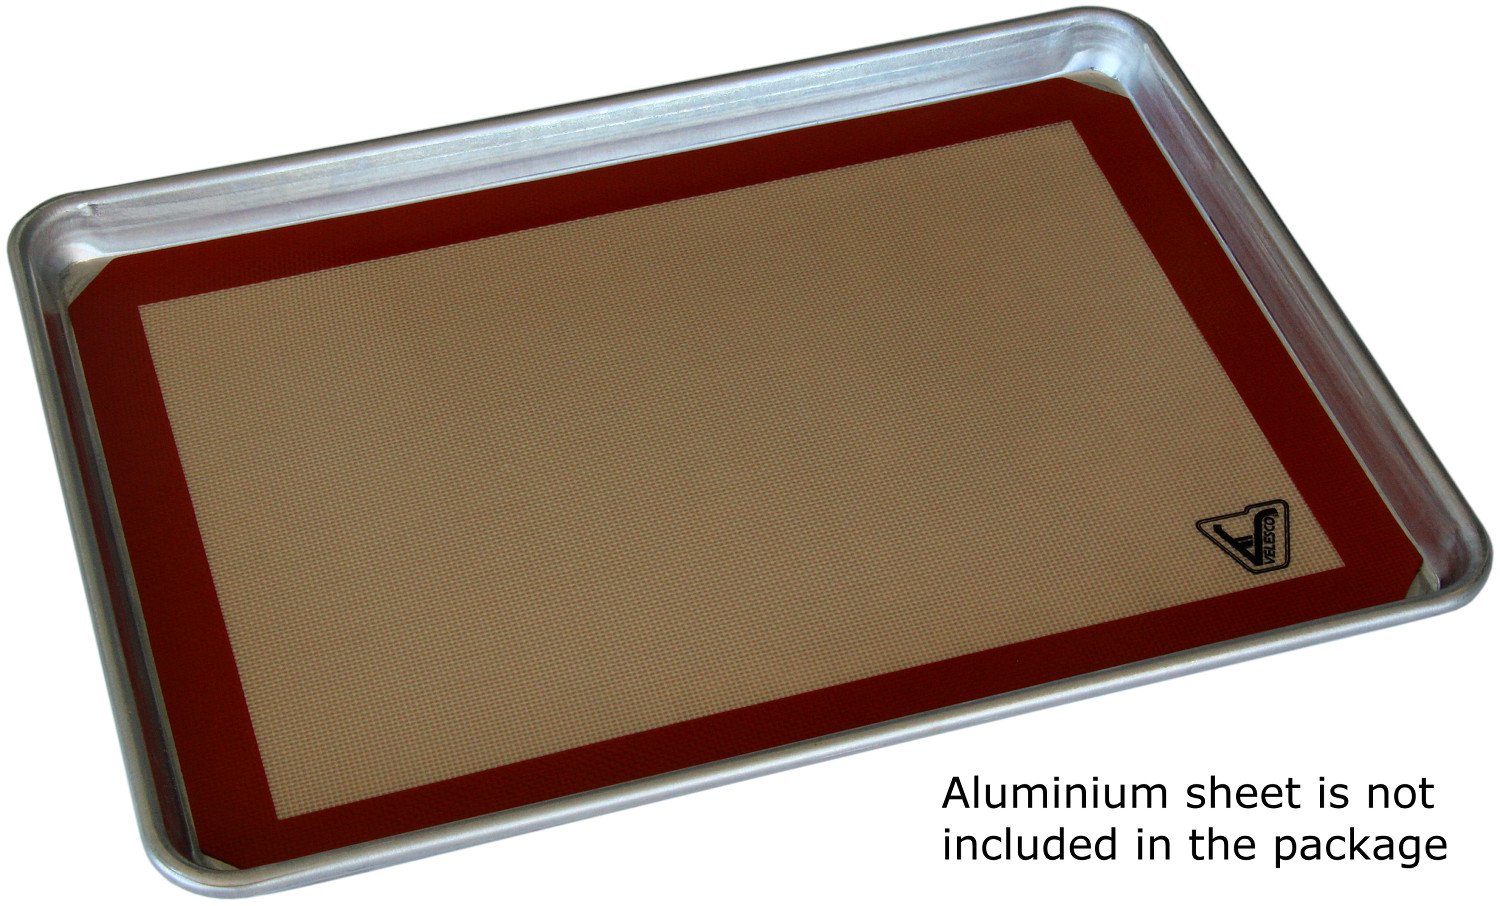 Silicone Baking Mat - Set of 3 Half Sheet (Thick & Large 11 5/8 x 16 1/2) - Non Stick Silicon Liner for Bake Pans & Rolling - Macaron/Pastry/Cookie/Bun/Bread Making - Professional Grade Nonstick by Velesco